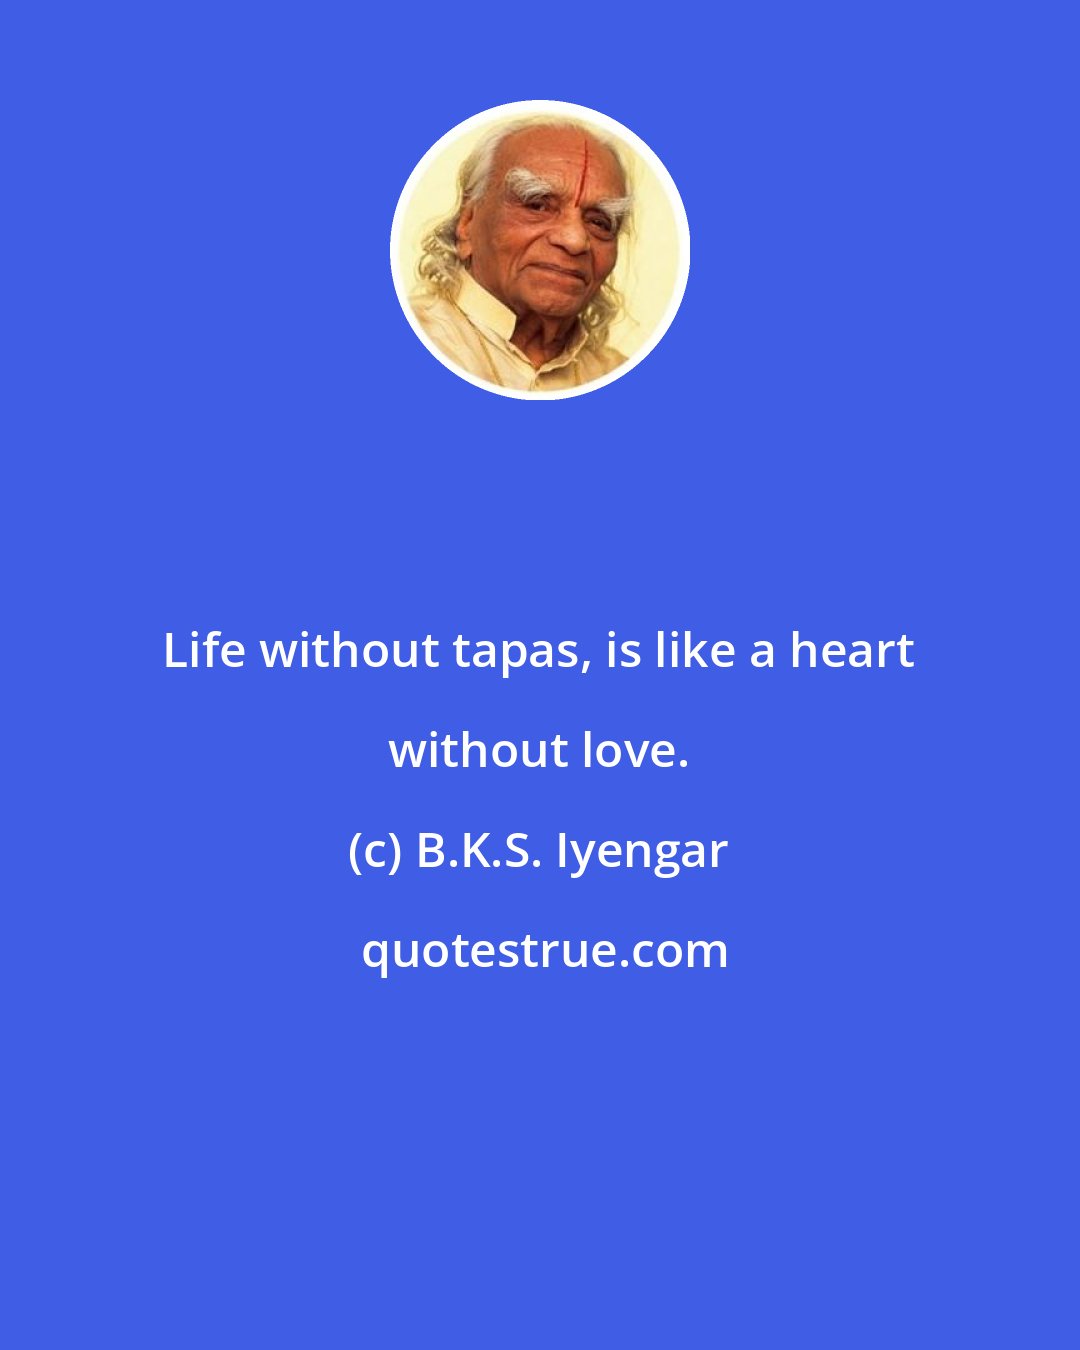 B.K.S. Iyengar: Life without tapas, is like a heart without love.